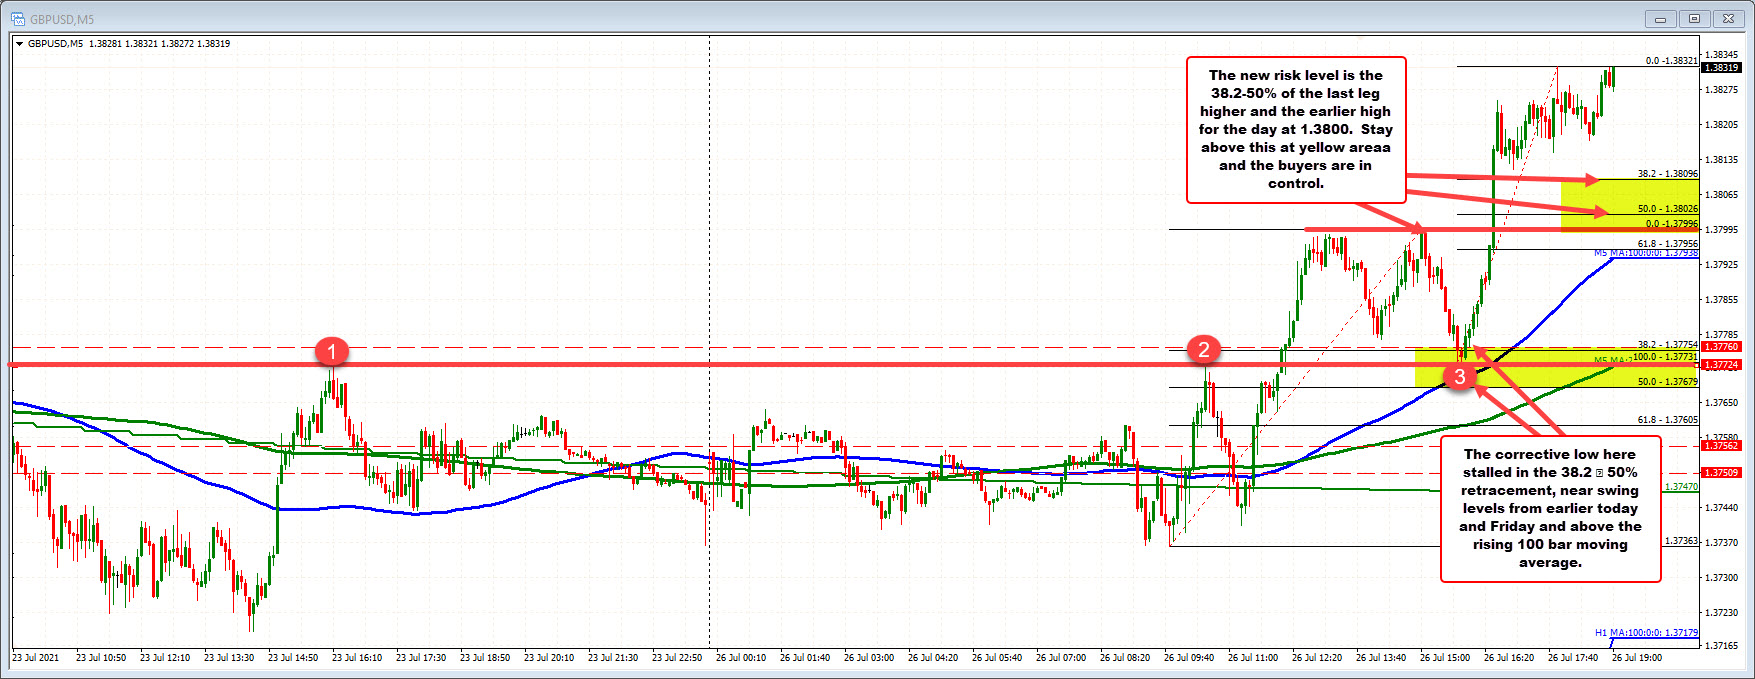 Intraday technical support did hold and the price raced higher in the GBPUSD